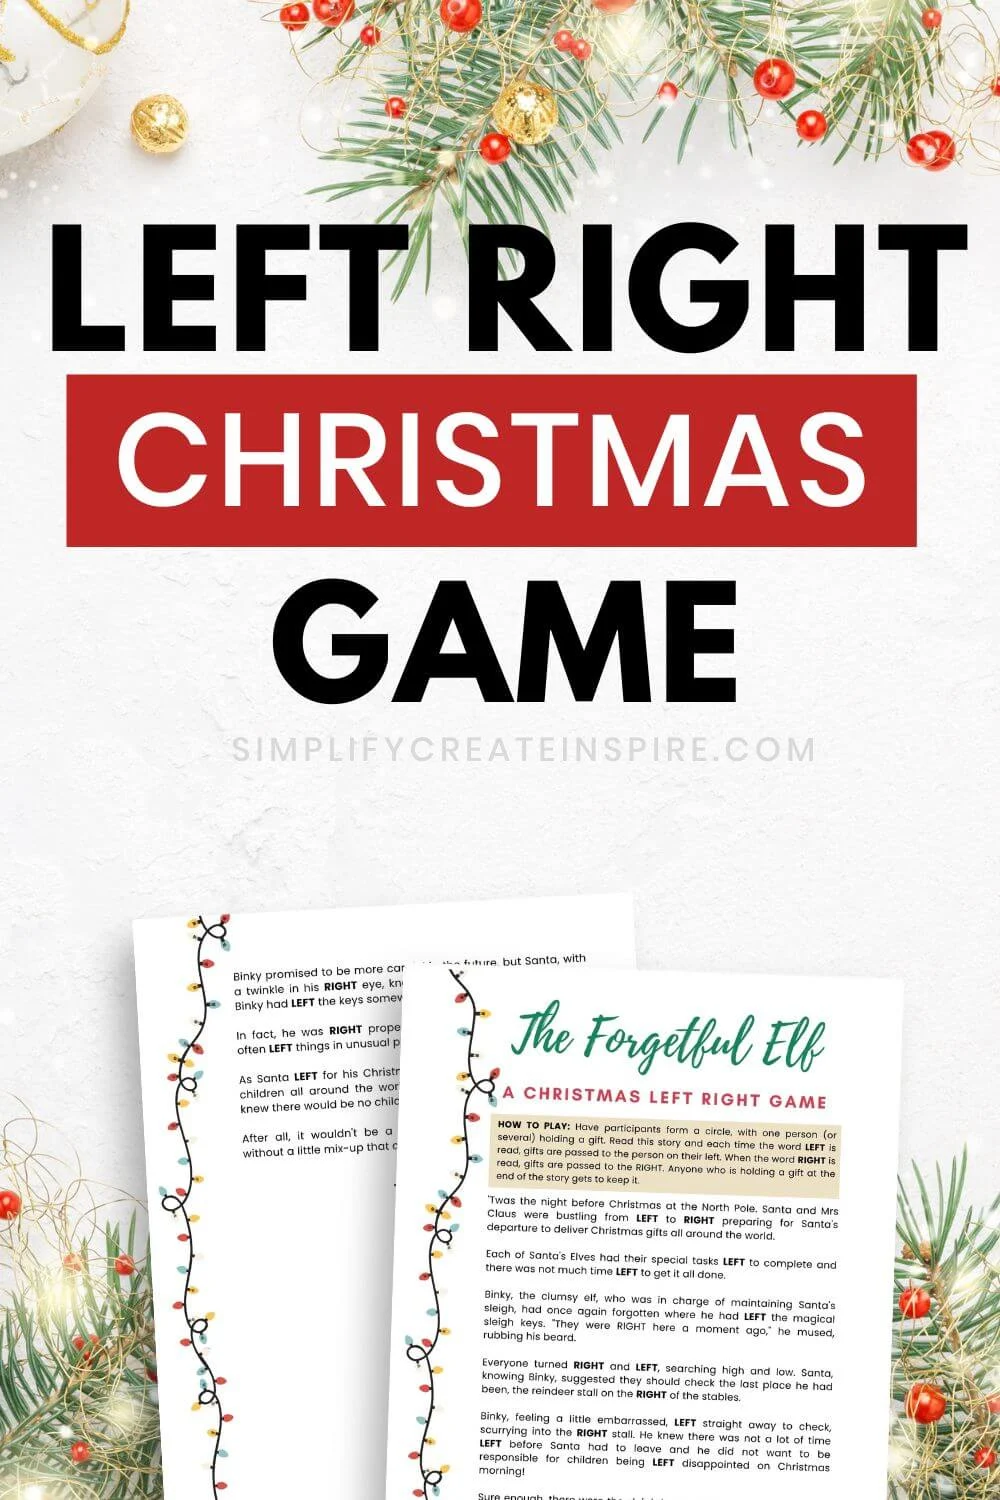 Christmas left right game.